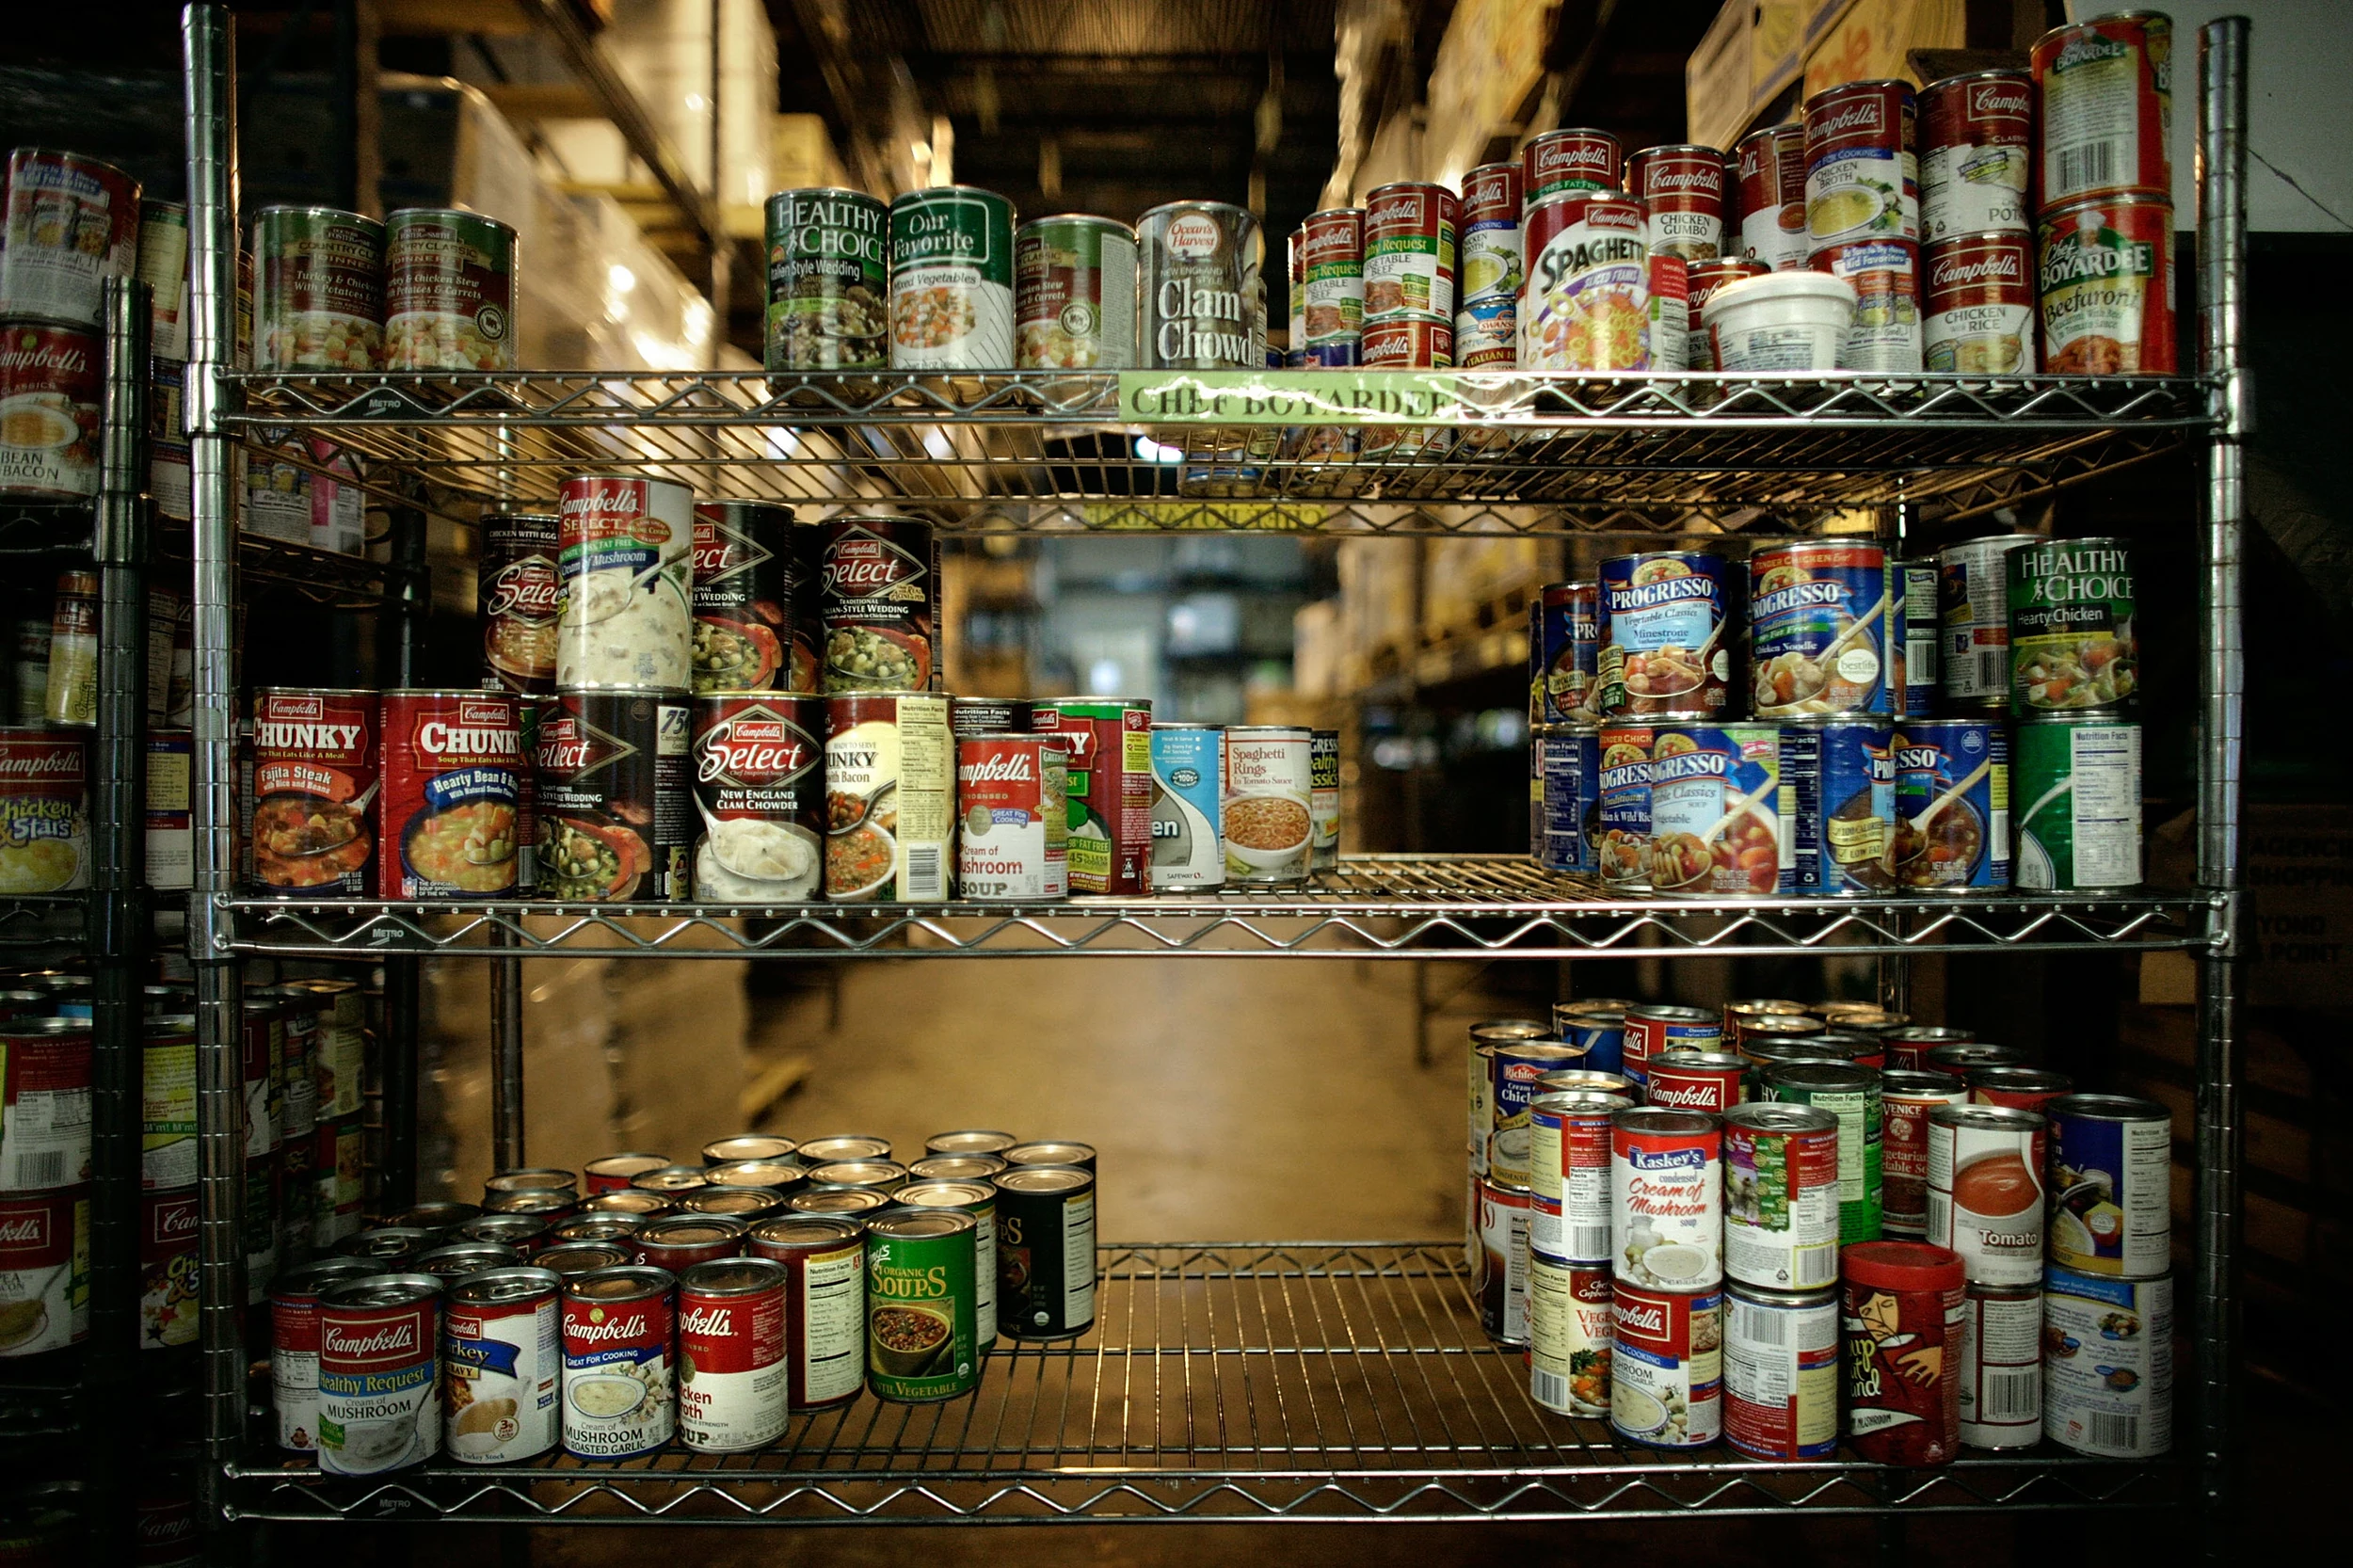 Client Choice Food Pantry